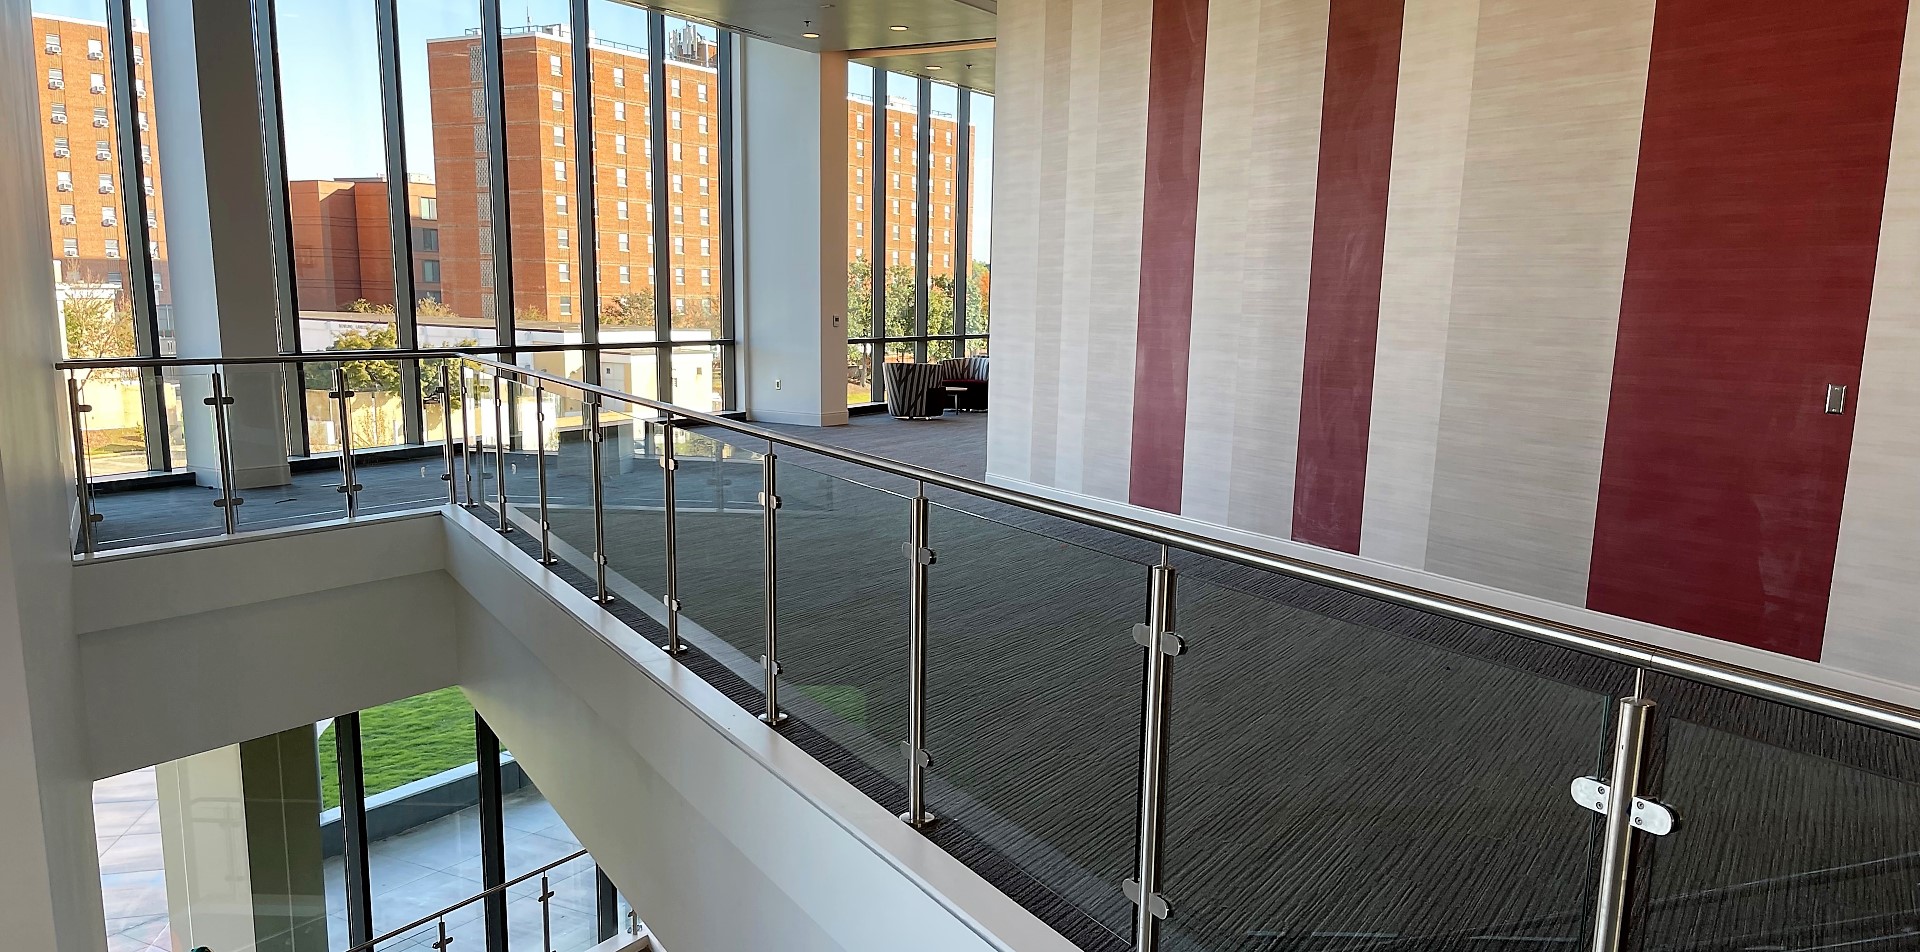 North Carolina Central University selects CIRCUM™ Round railing for their new student center.